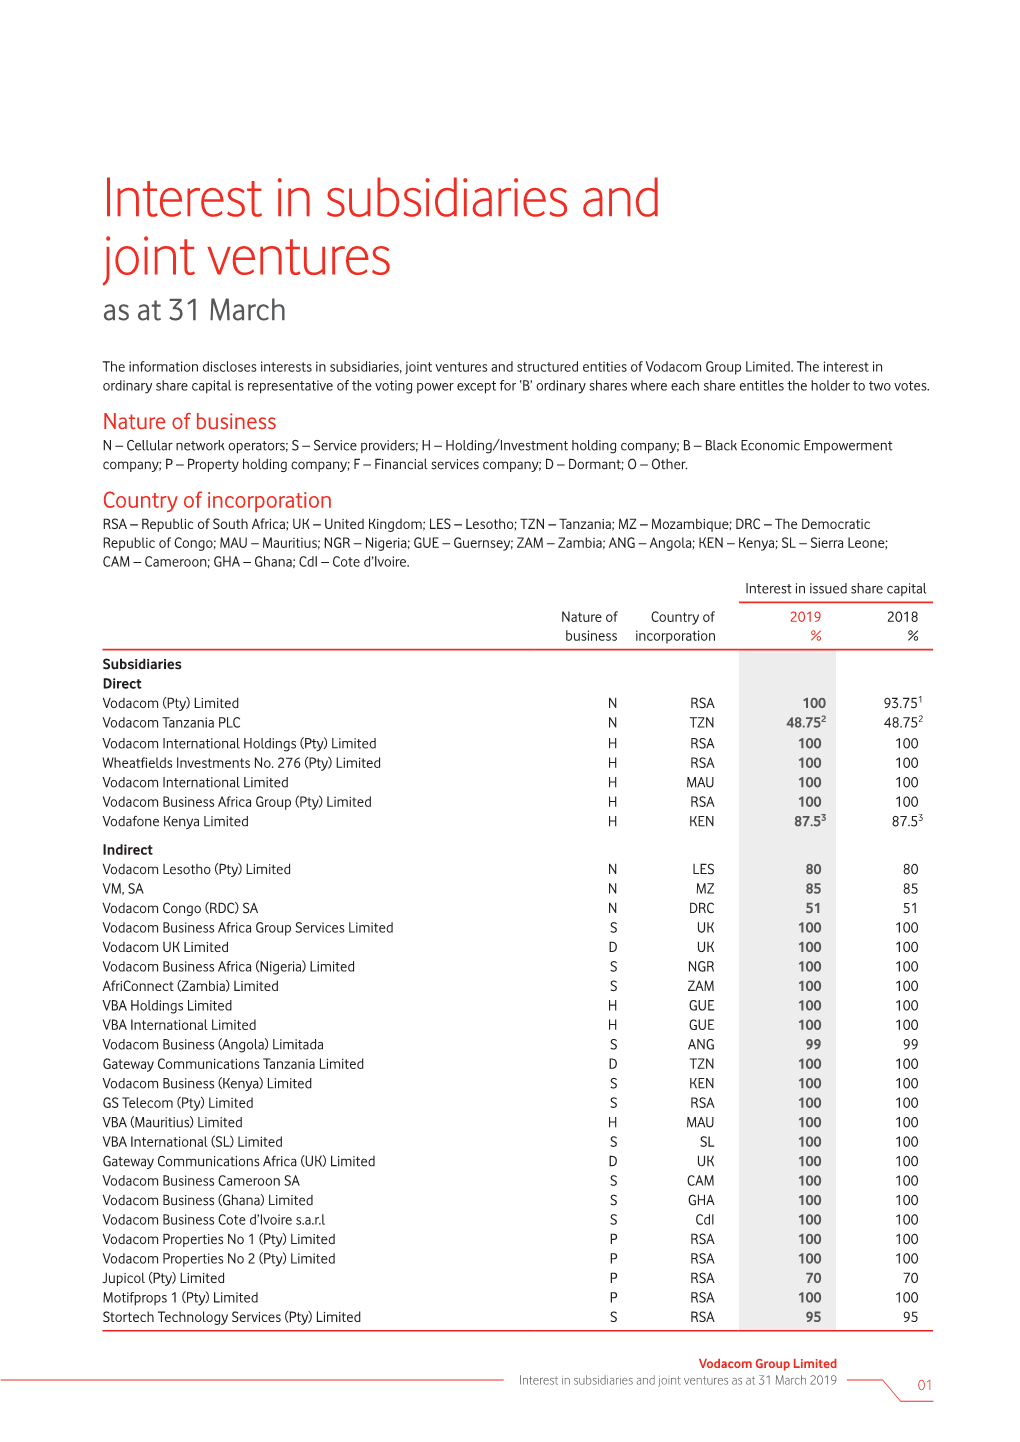 Interest in Subsidiaries and Joint Ventures As at 31 March